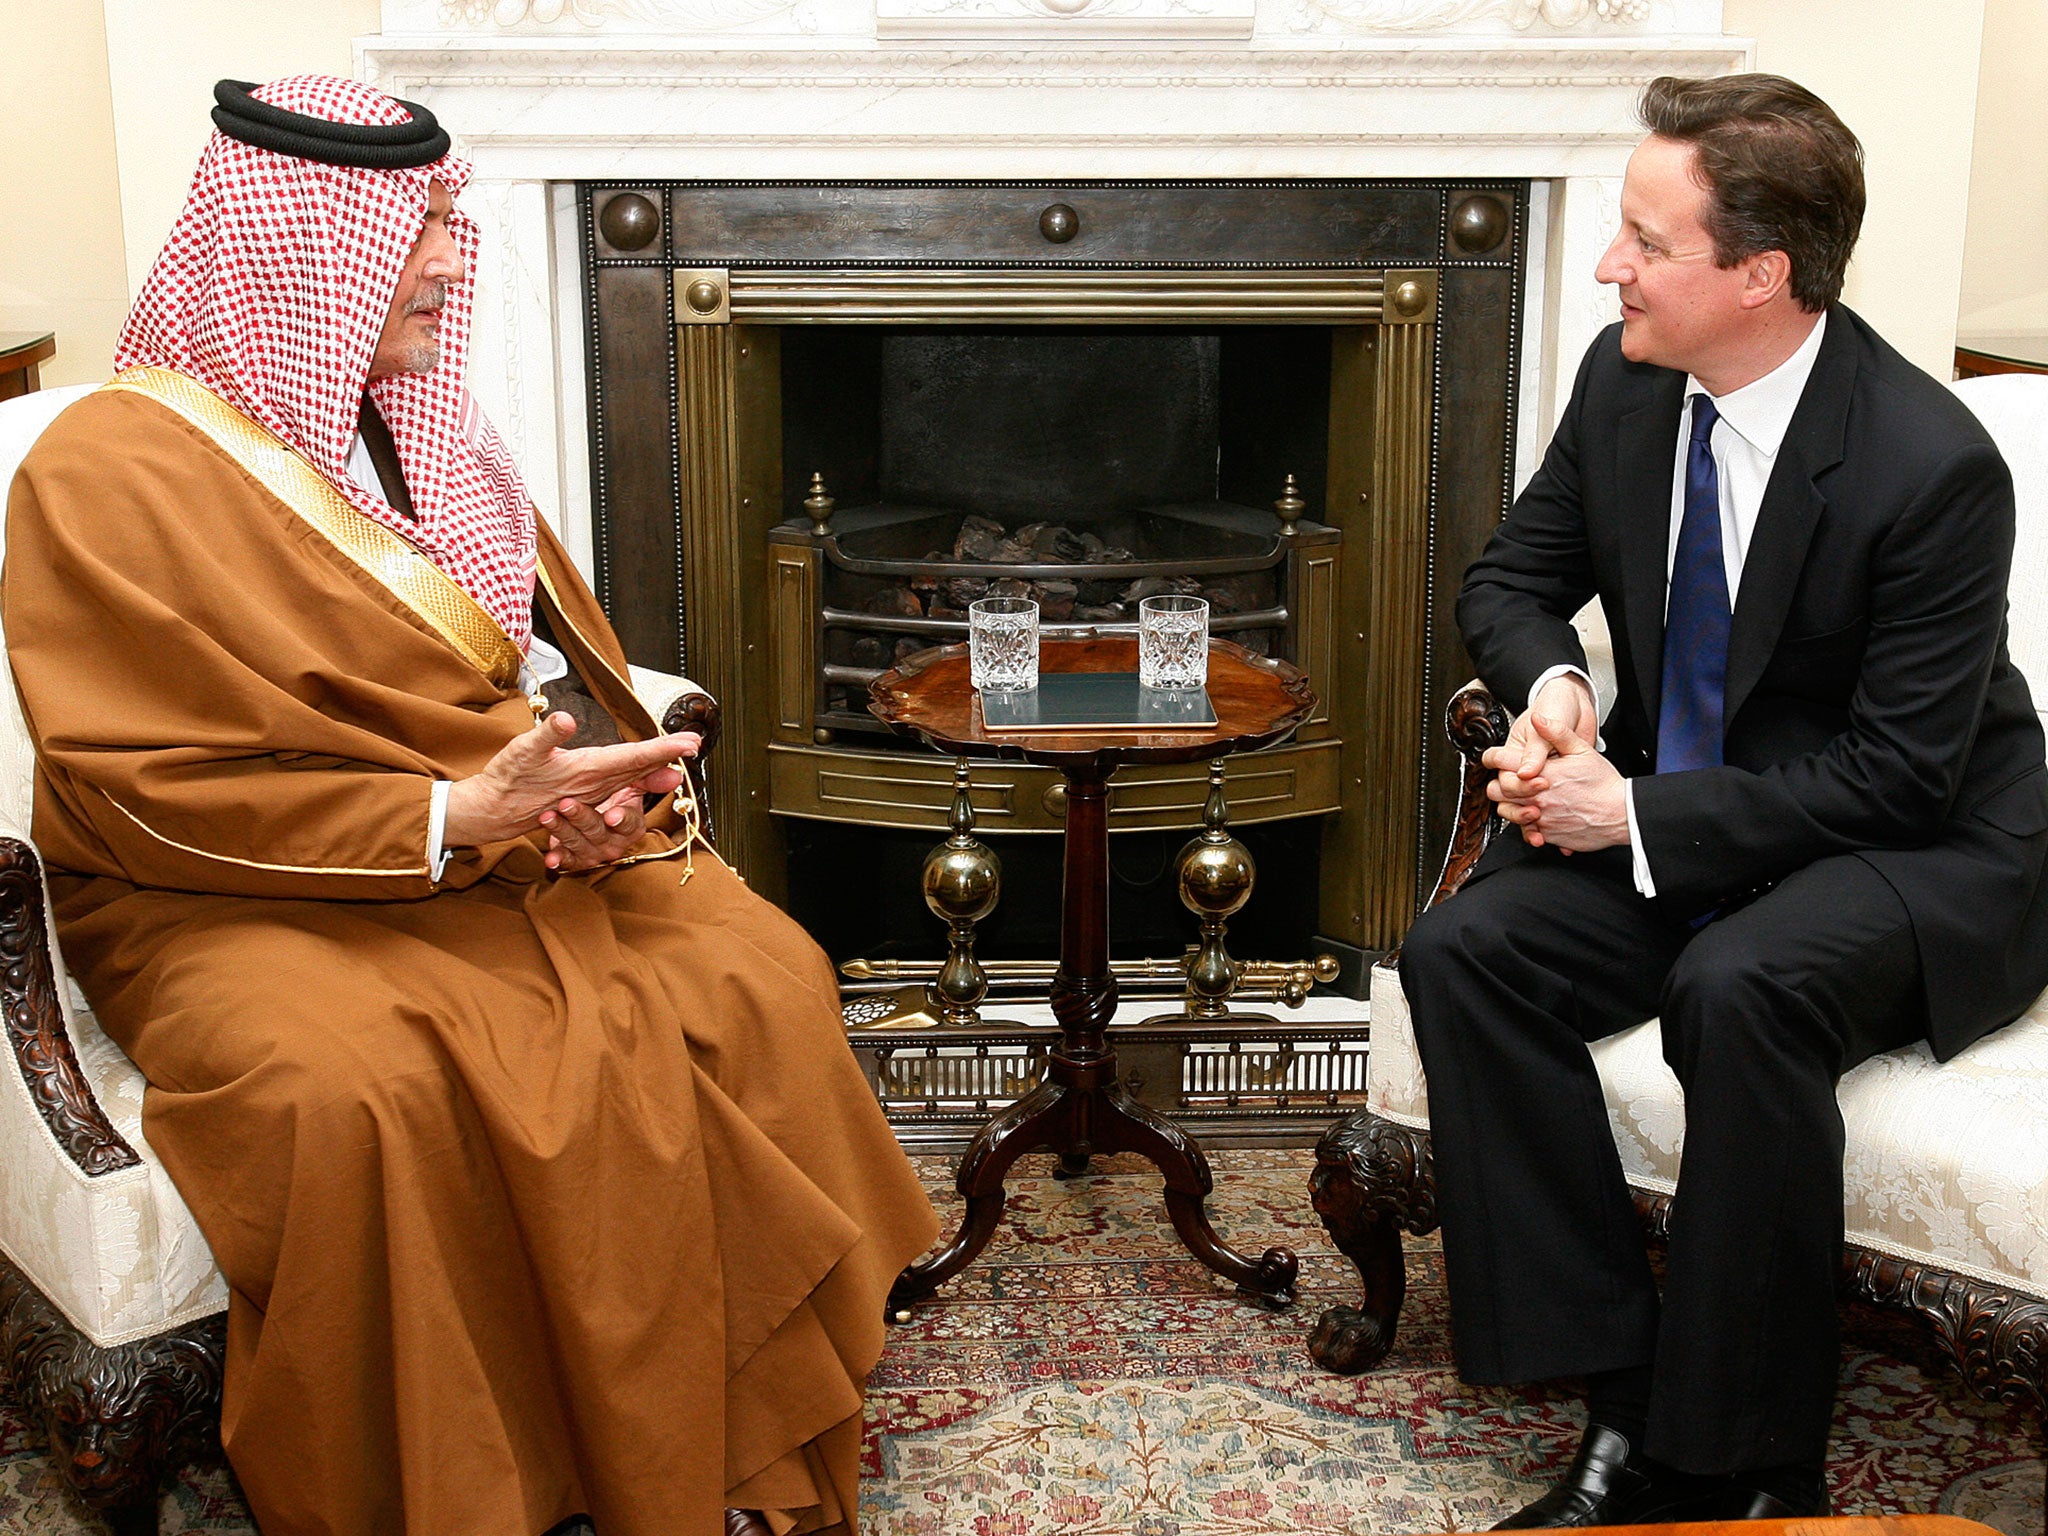 David Cameron meets with Saudi Arabia's Foreign Minister Prince Saud al-Faisal inside 10 Downing Street in London, on March 22, 2011.